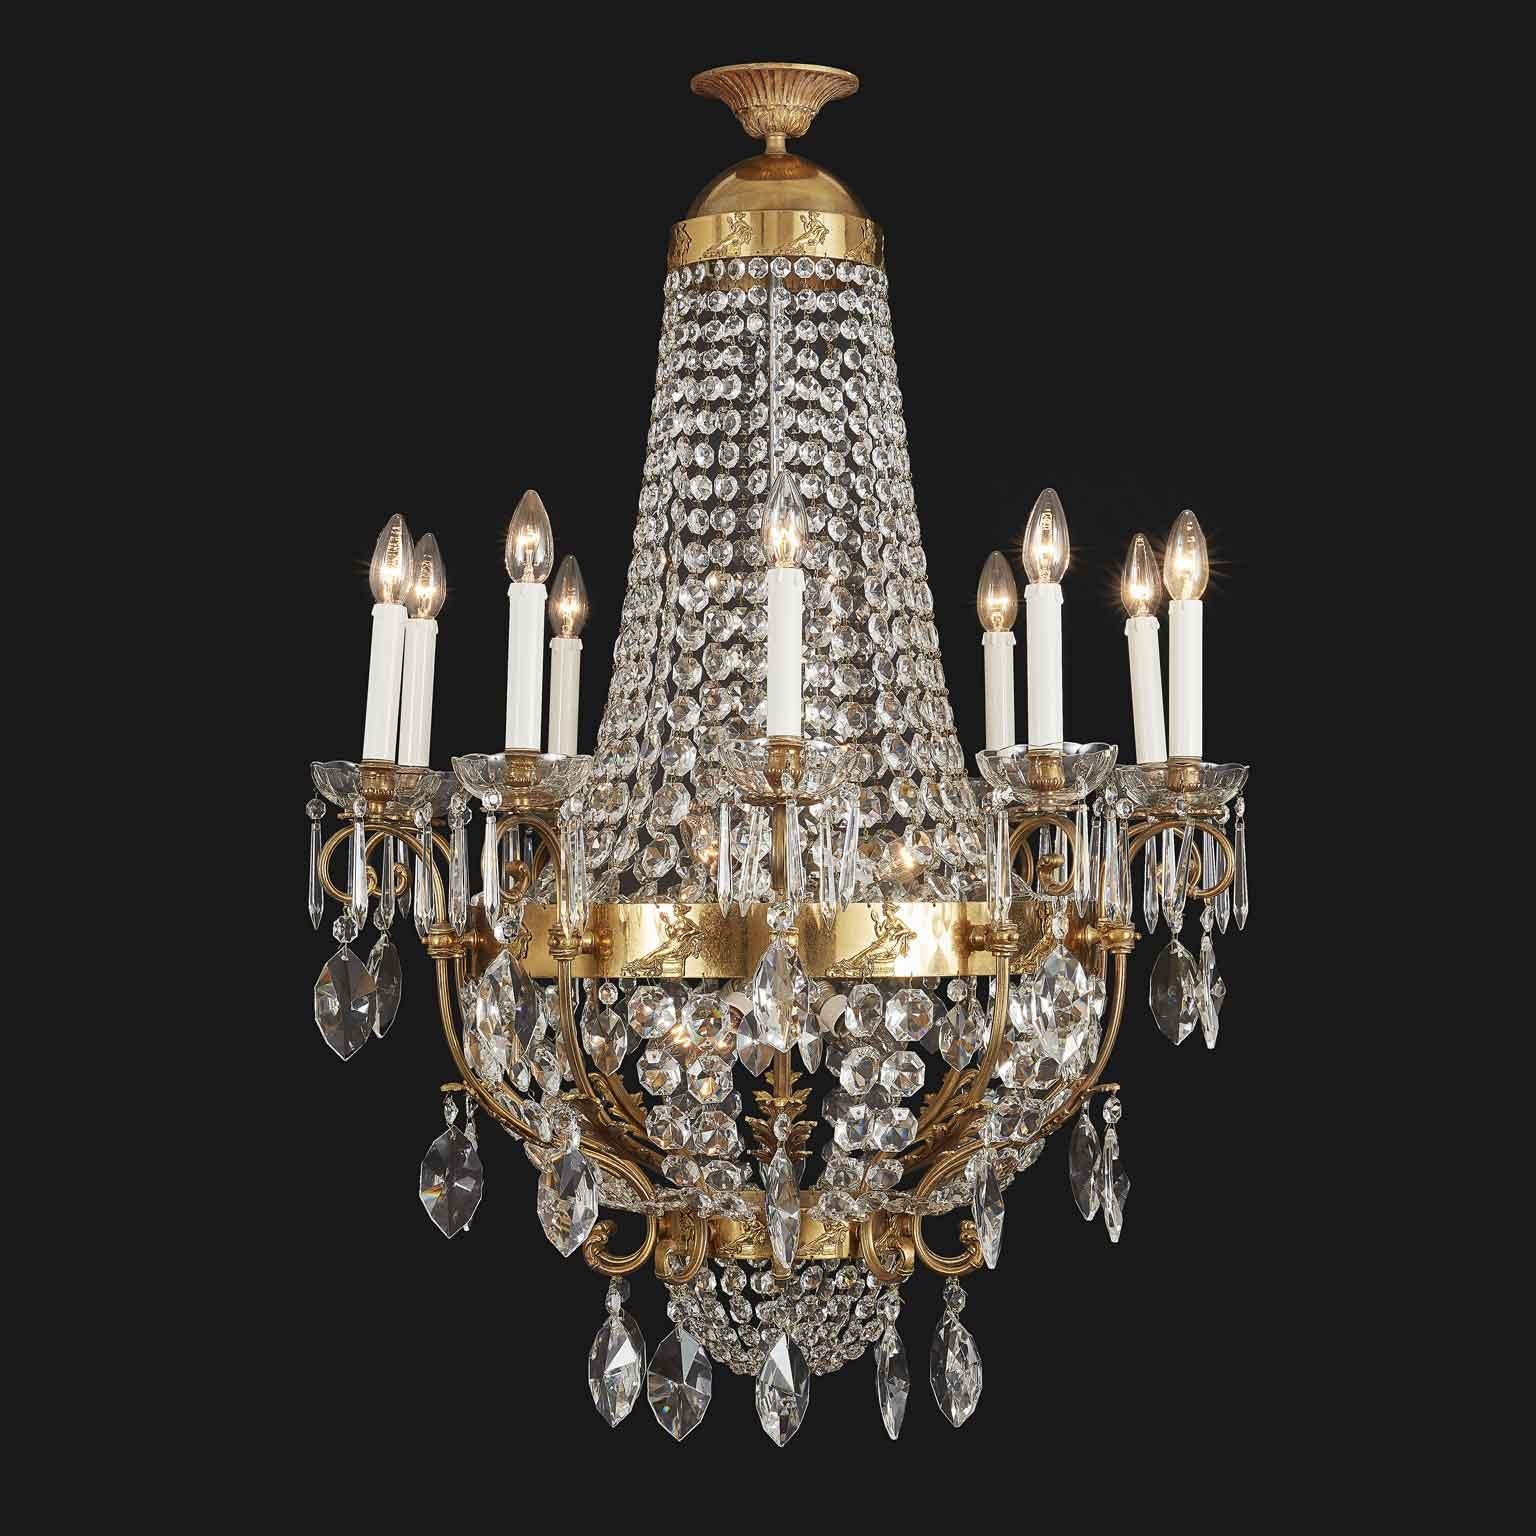 20th Century Italian Neoclassical Style Crystal Chandelier Roman Female Figures For Sale 8